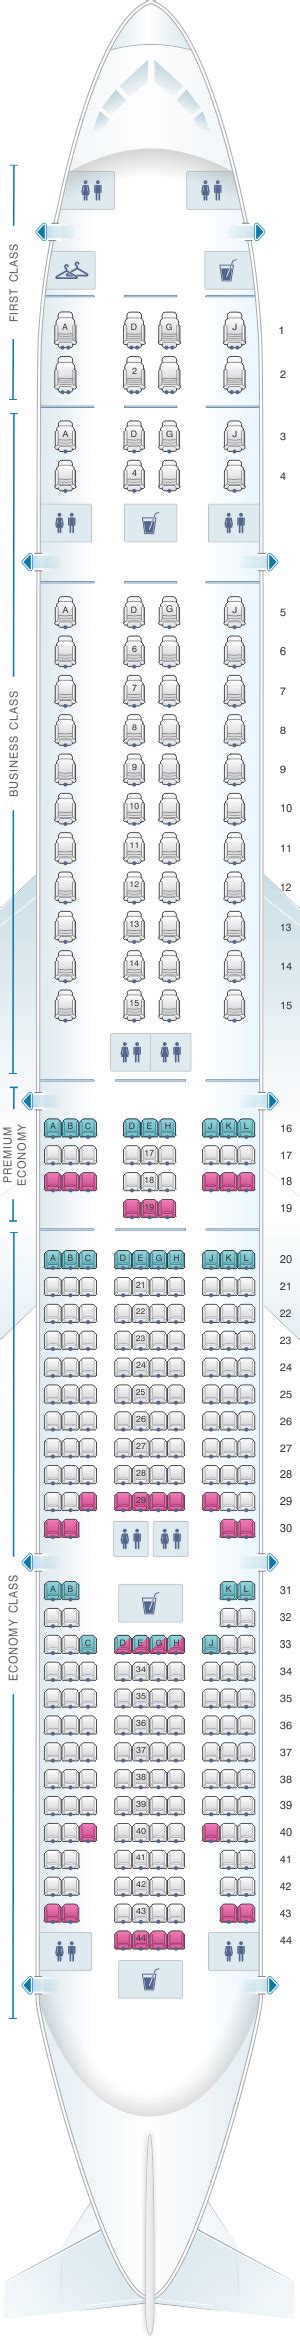 Contact information for aktienfakten.de - For your next American Airlines flight, use this seating chart to get the most comfortable seats, ... Boeing 777-300ER (77W) Boeing 787-8 (788) ...